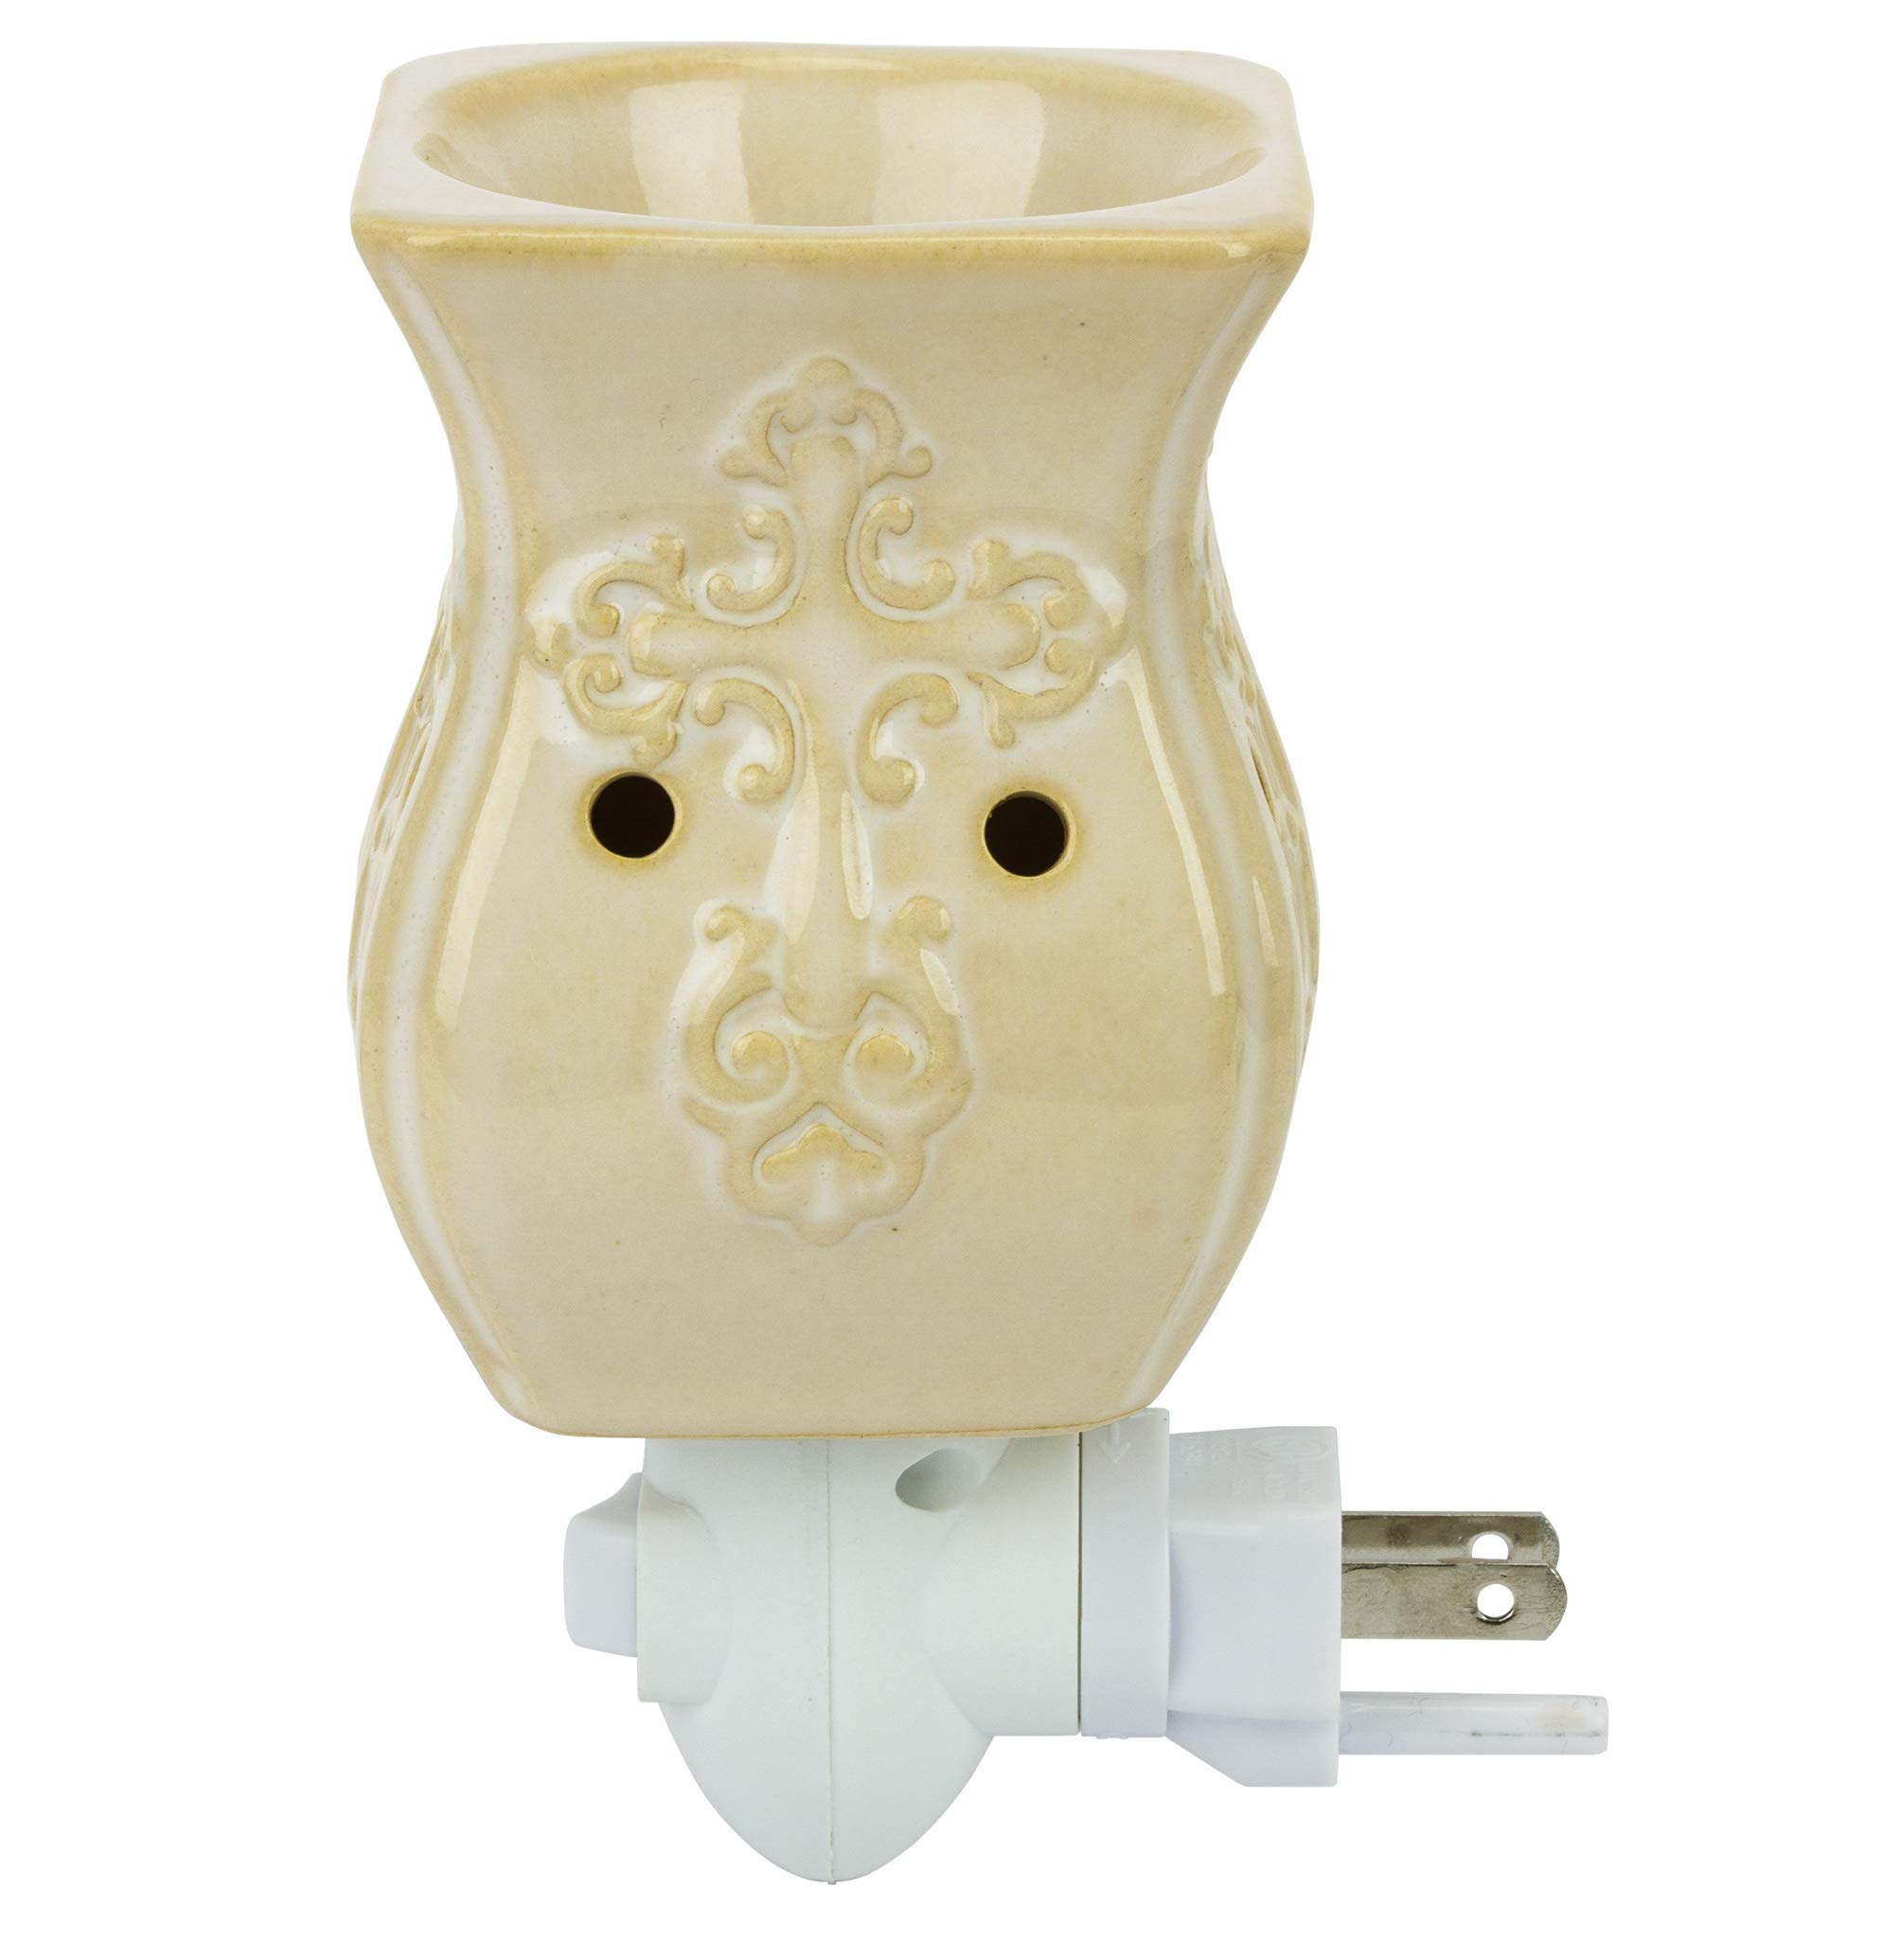 Dawhud Direct Wall Plug-in Wax Warmer for Scented Wax Ceramic Antique White Ceramic Accent Electric Home Fragrance Warmer for Essential Oils Candle Wax Melts and Tarts Scent Warmer Night Light